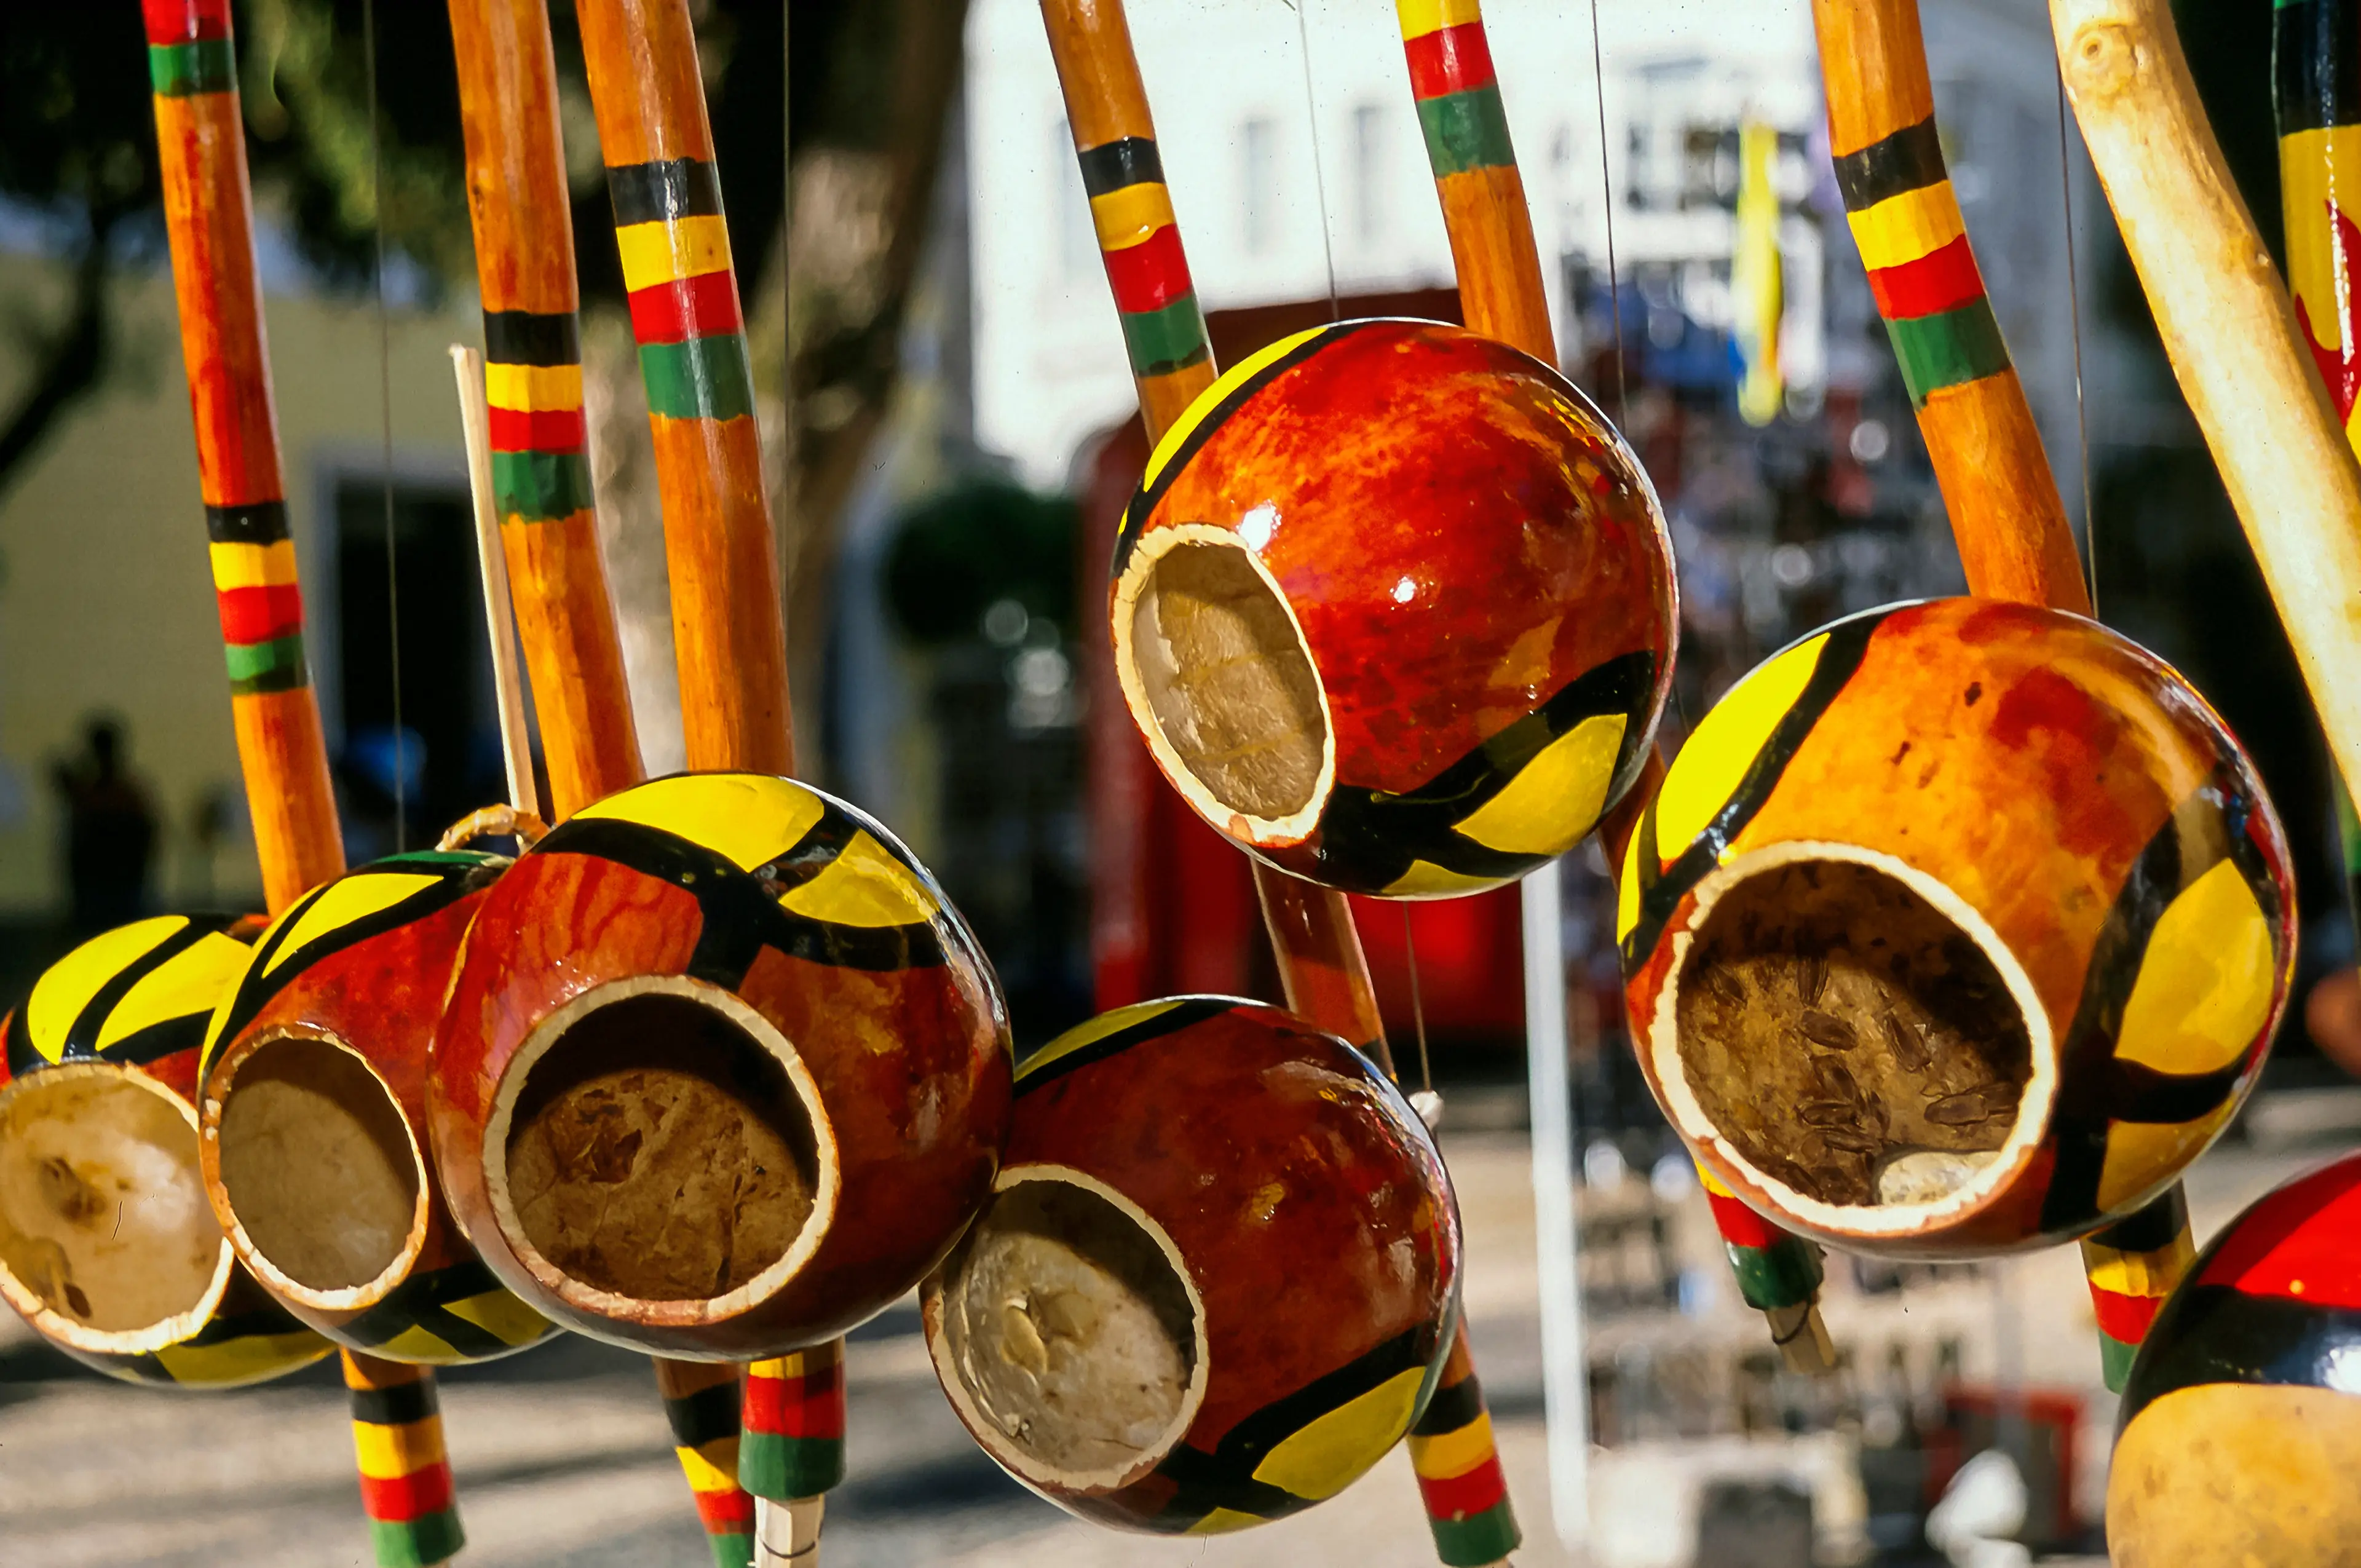 A display of berimbau, the instrument used in capoeira